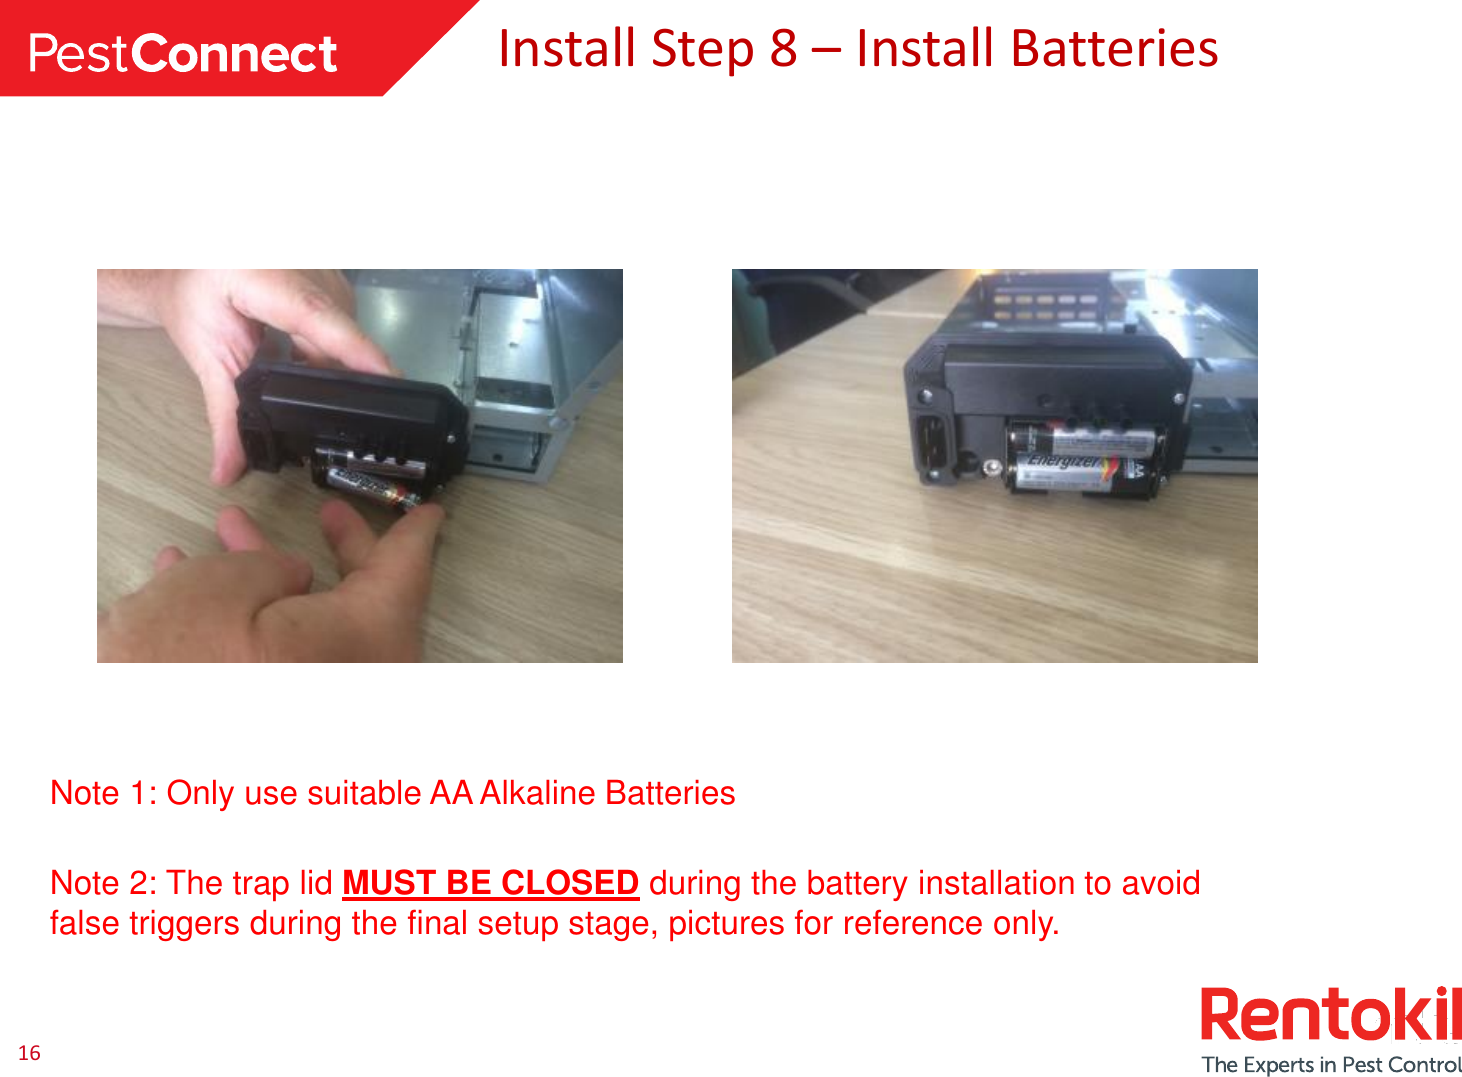 16 Install Step 8 – Install Batteries Note 1: Only use suitable AA Alkaline Batteries  Note 2: The trap lid MUST BE CLOSED during the battery installation to avoid false triggers during the final setup stage, pictures for reference only. 